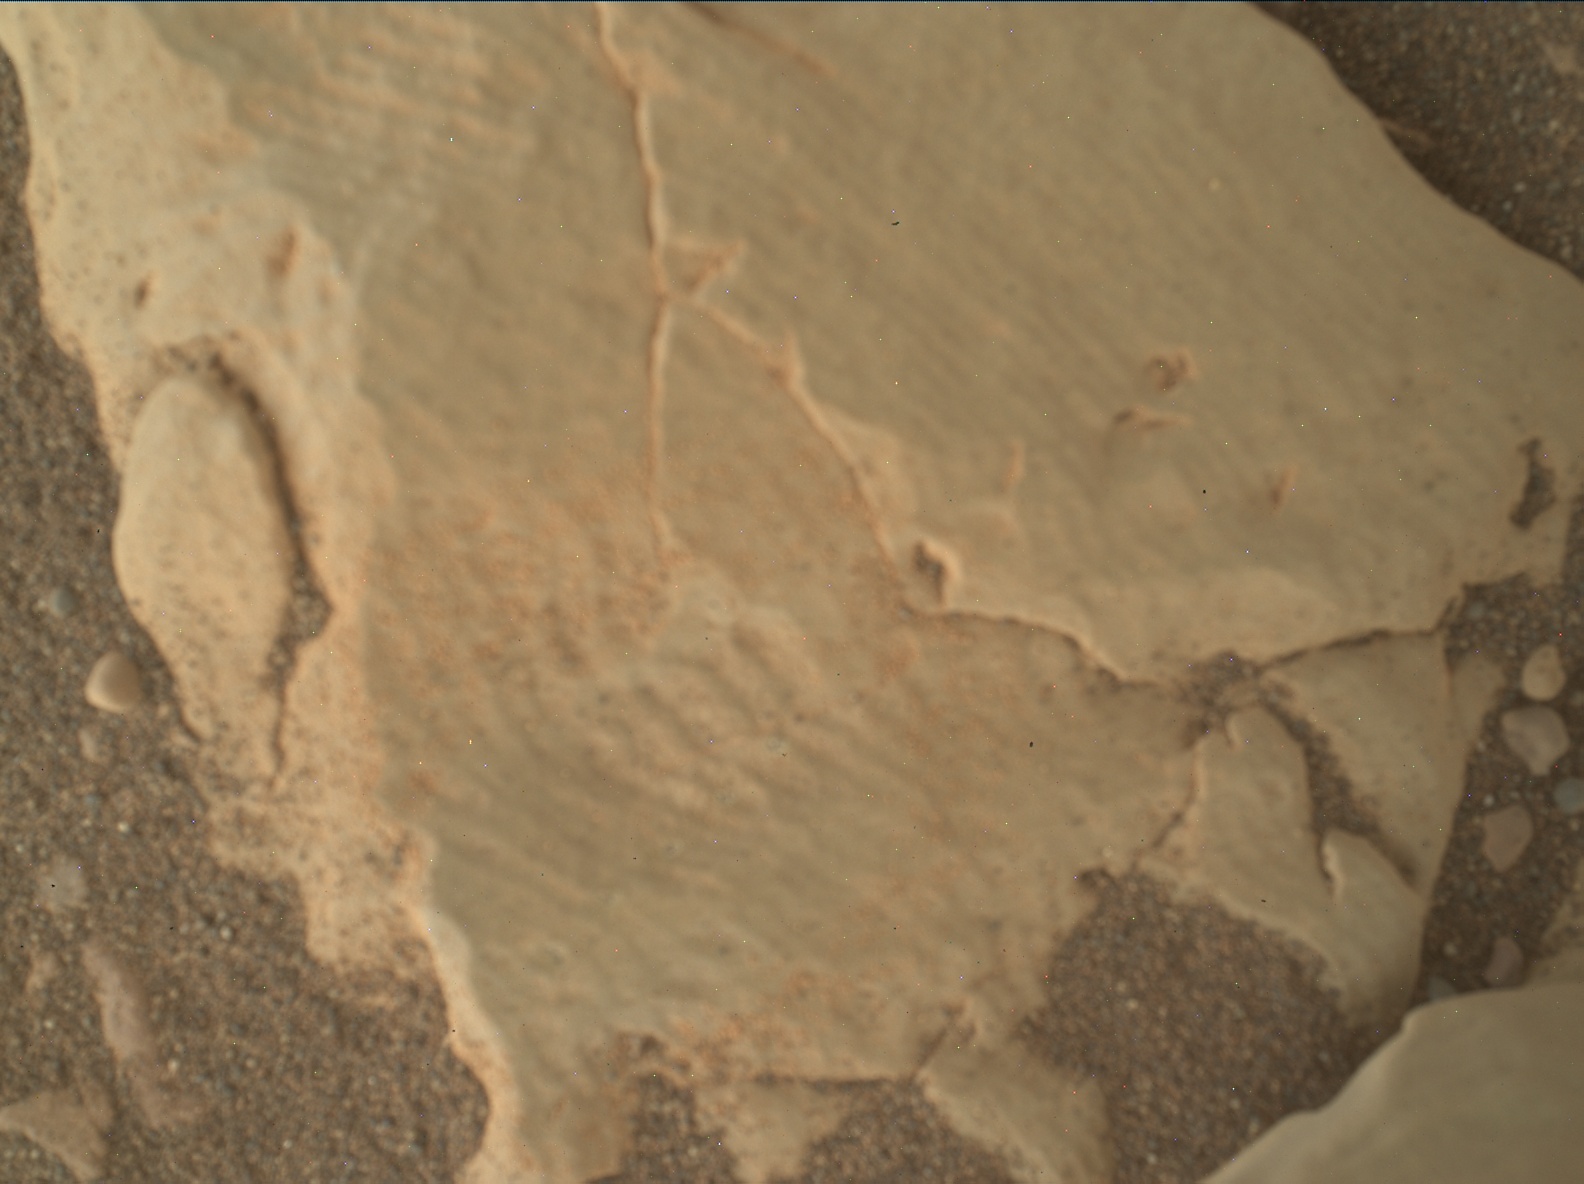 Nasa's Mars rover Curiosity acquired this image using its Mars Hand Lens Imager (MAHLI) on Sol 2431